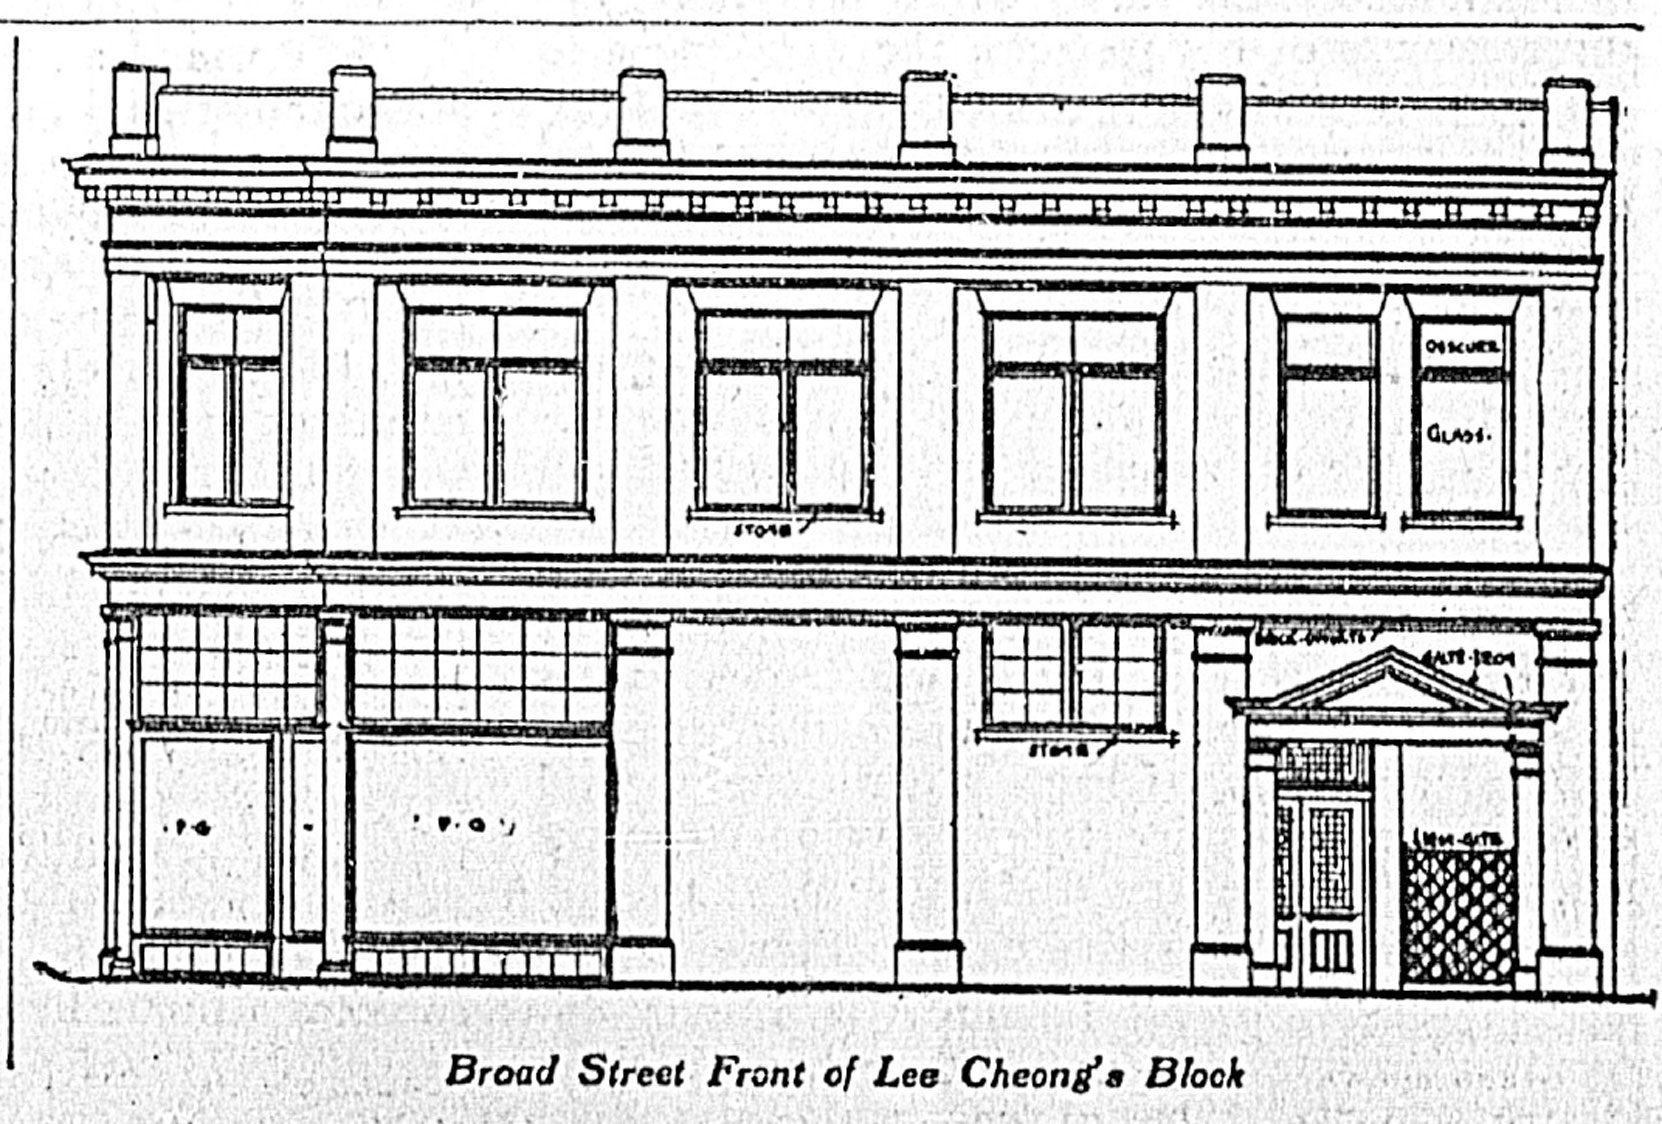 Architect's drawing (1909) of the Broad Street elevation of the Lee Cheong Block, now 618-624 Johnson Street,/1400-1402 Broad Street. The architects were Thomas Hooper and C. Elwood Watkins.